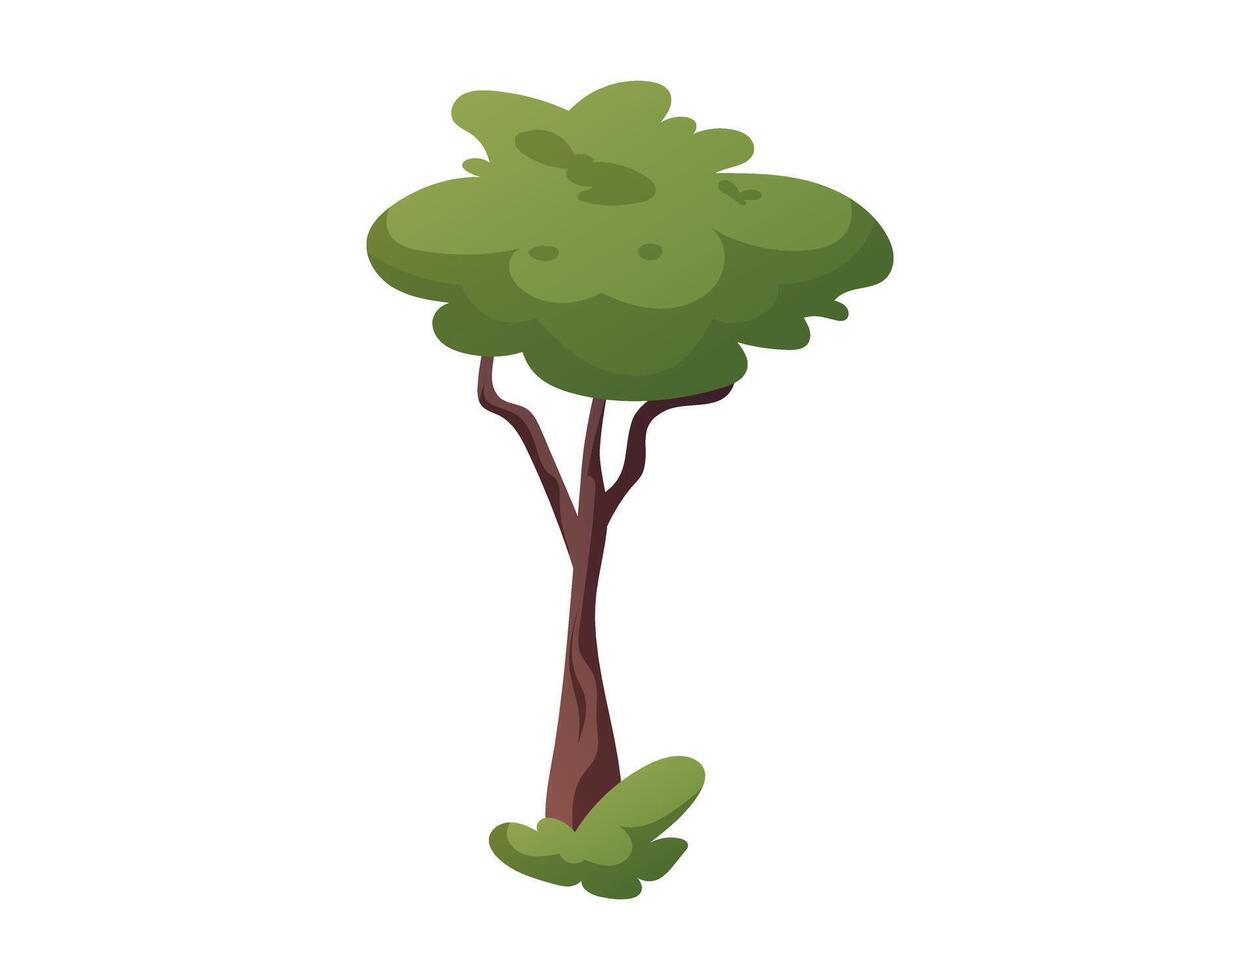 Cartoon summer tree with green crown and foliage. Vector isolated illustration.